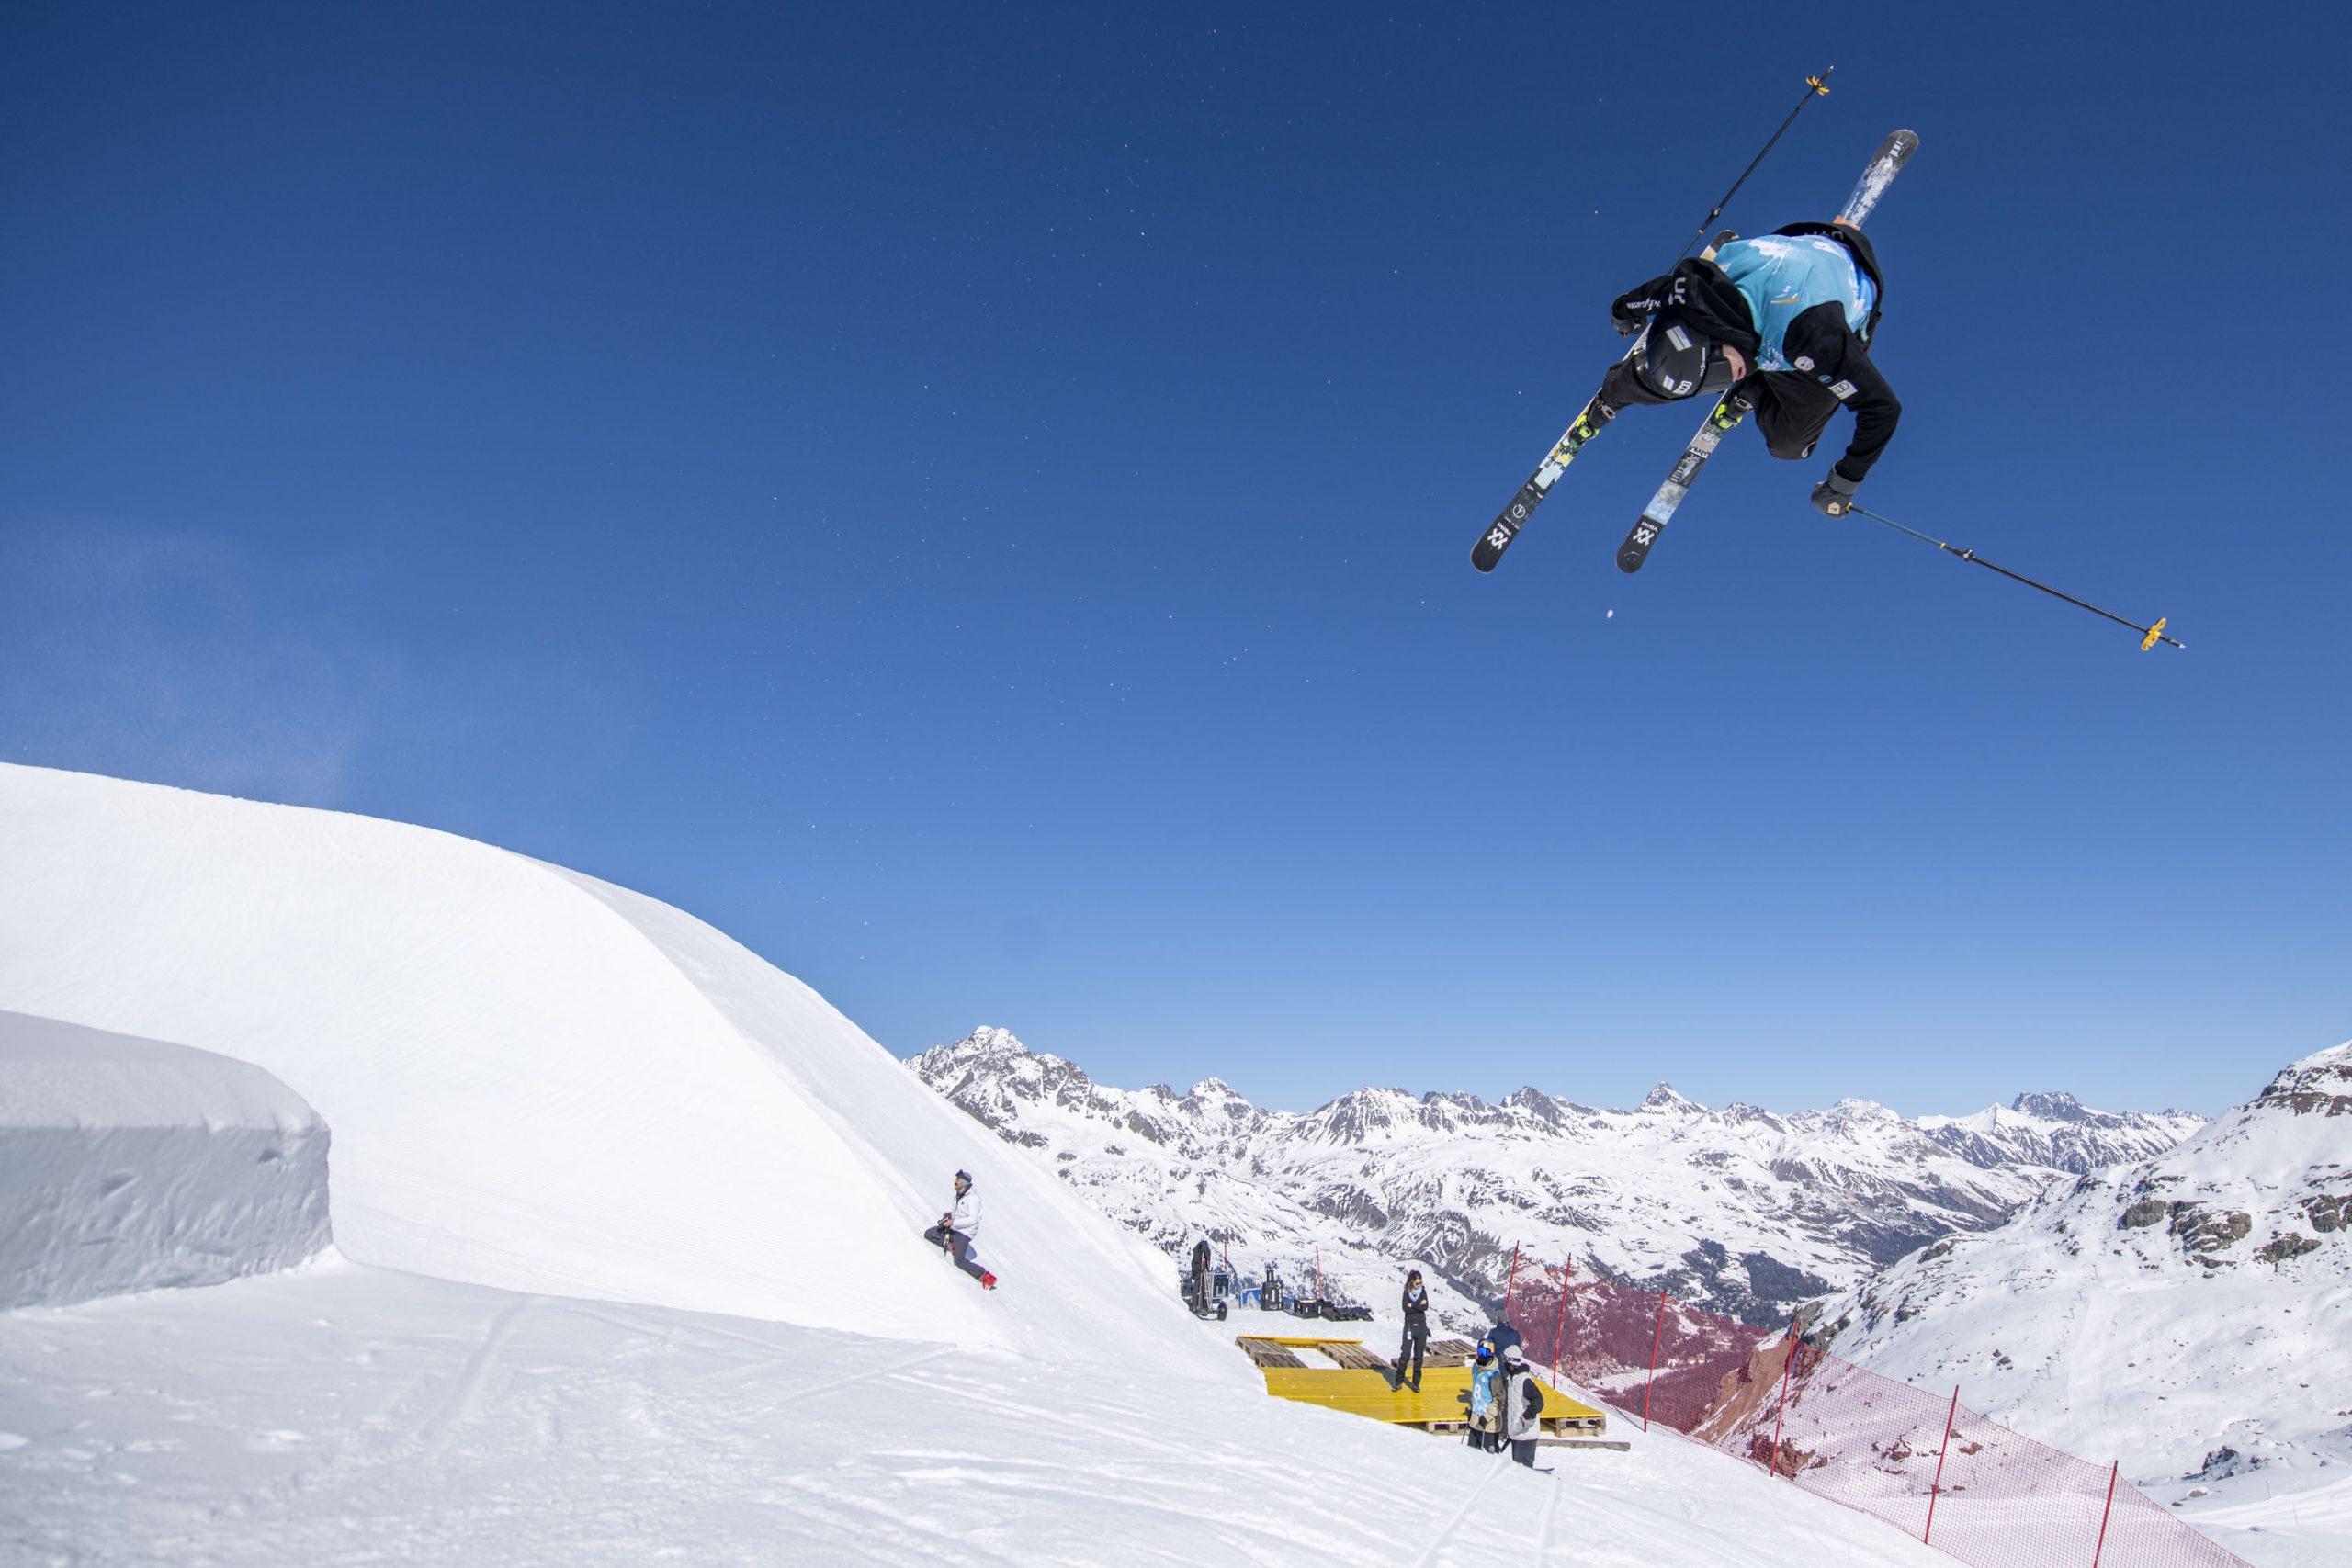 Lukas Muellauer competes at the 2022 Freeski World Cup Corvatsch